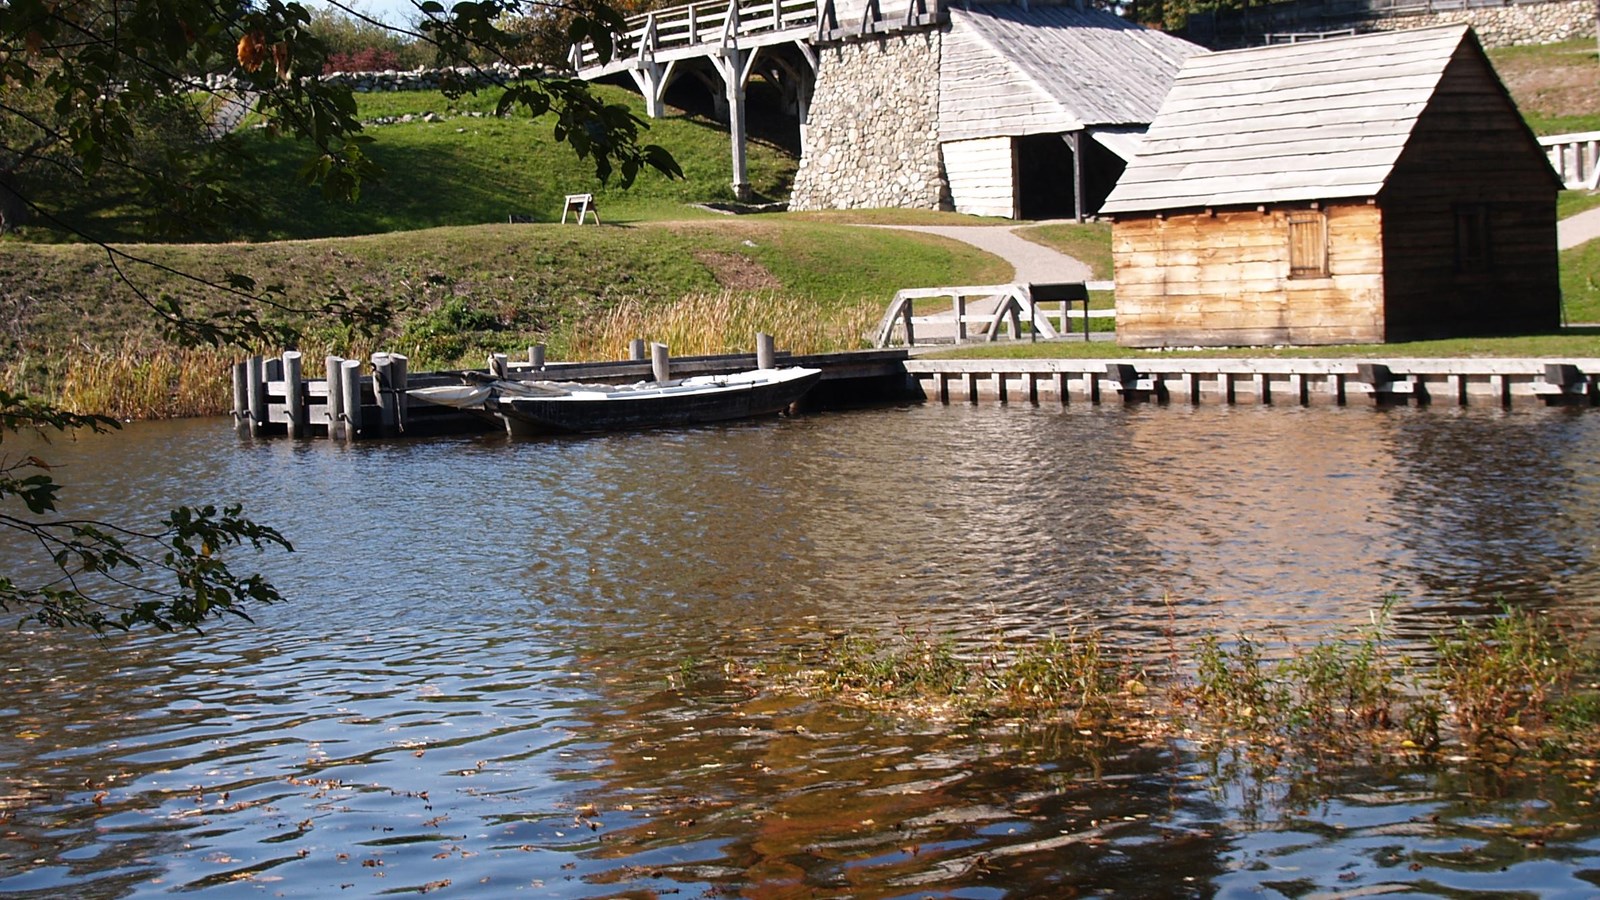 Small single-story building used for storage with wooden dock on the Saugus River